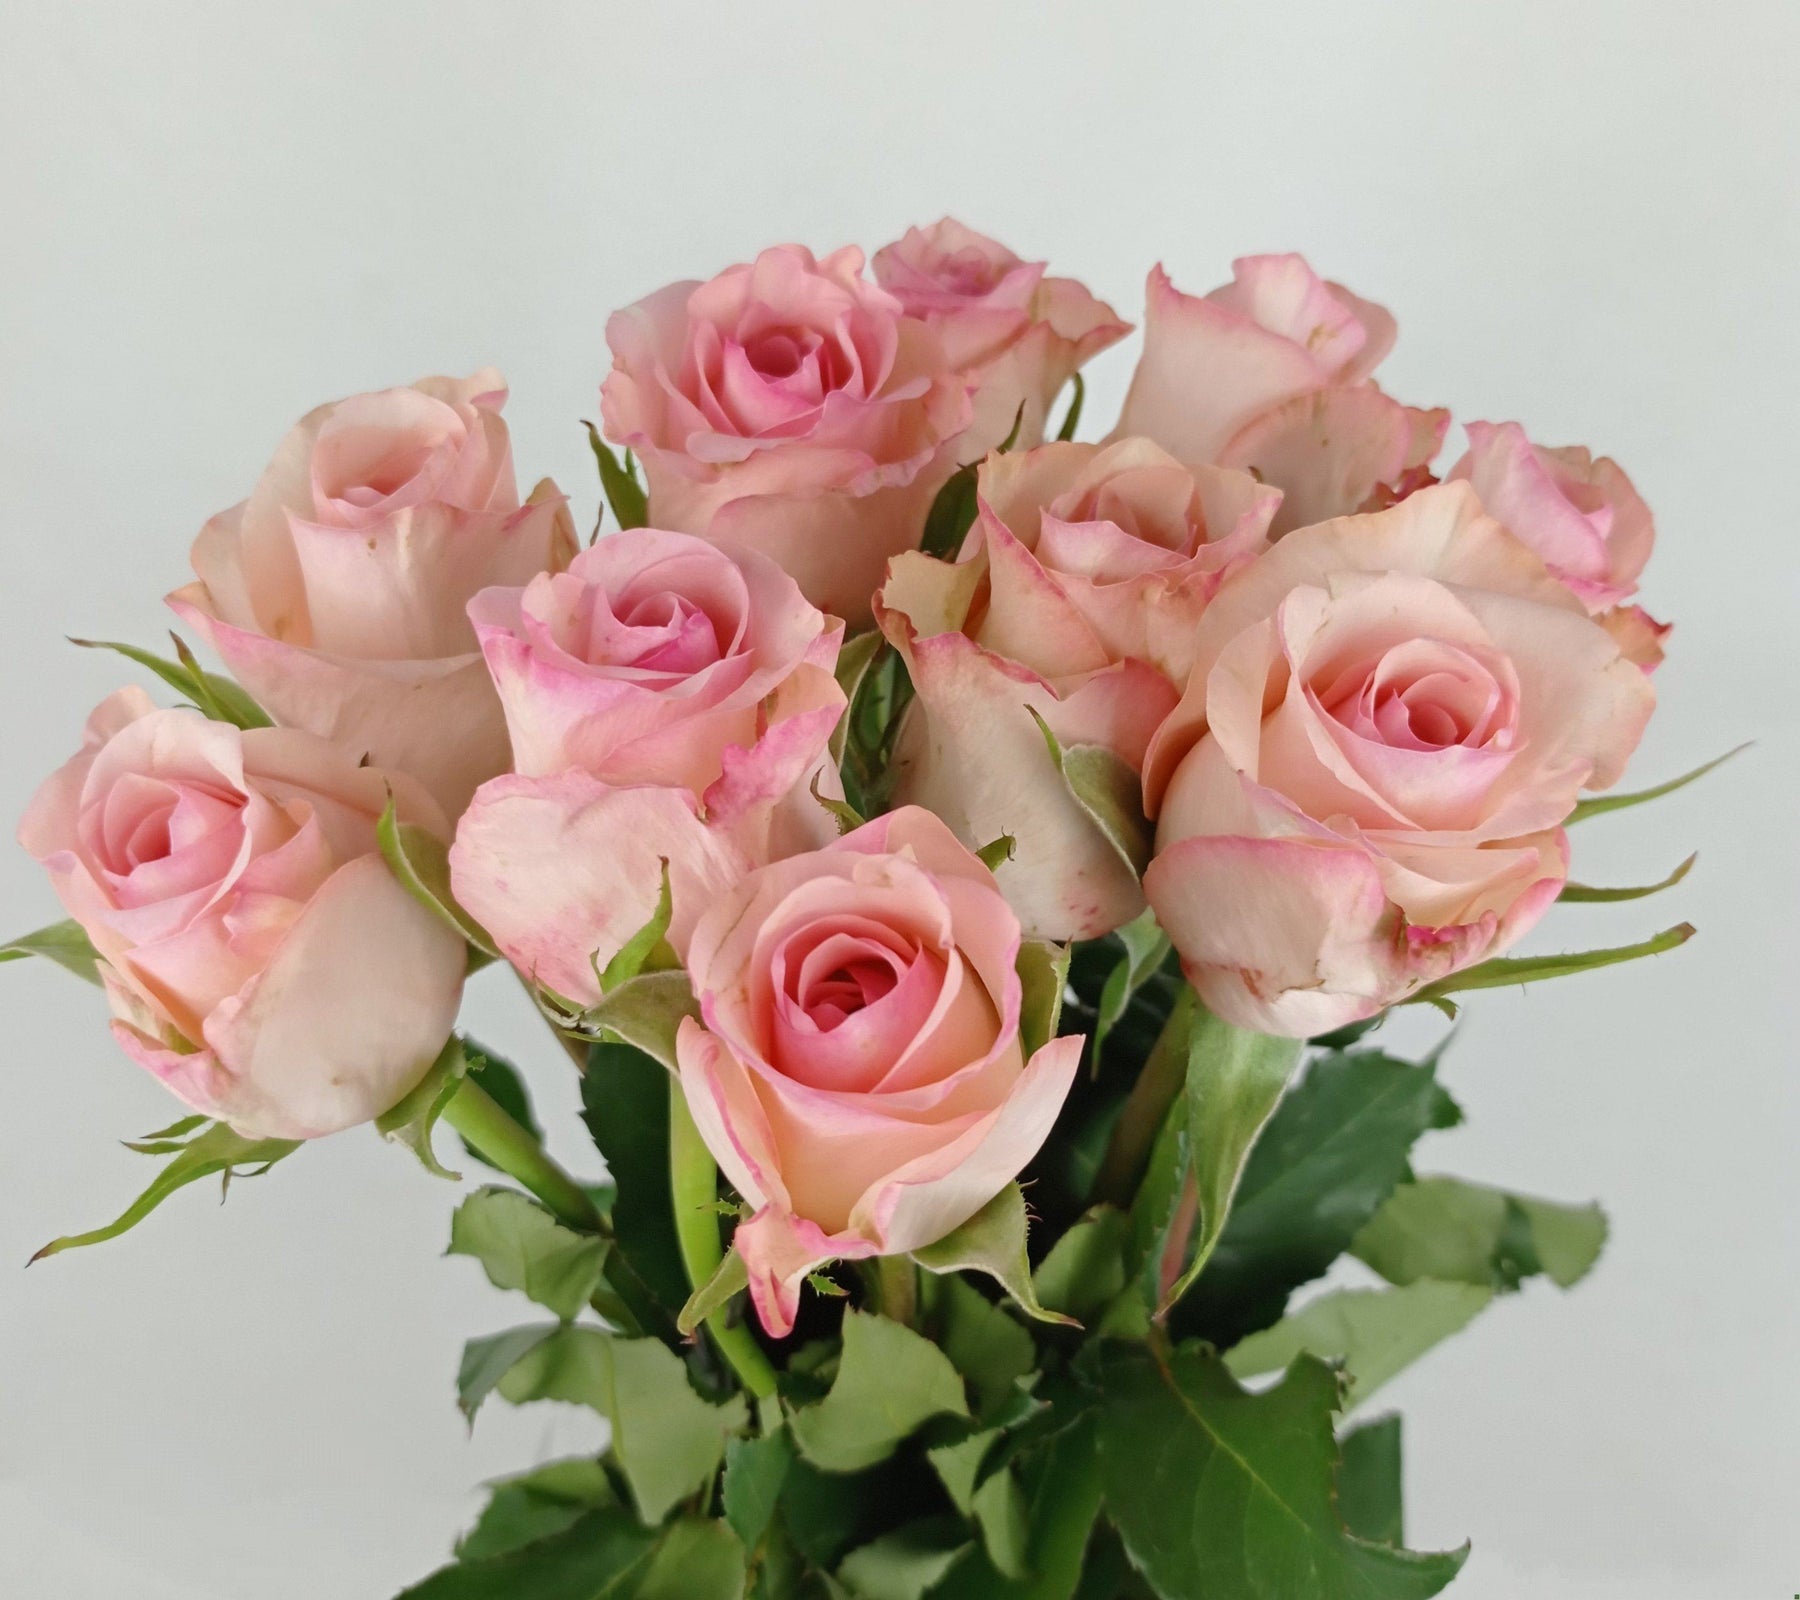 Rose 50cm (Imported) - 2 Tone Pink